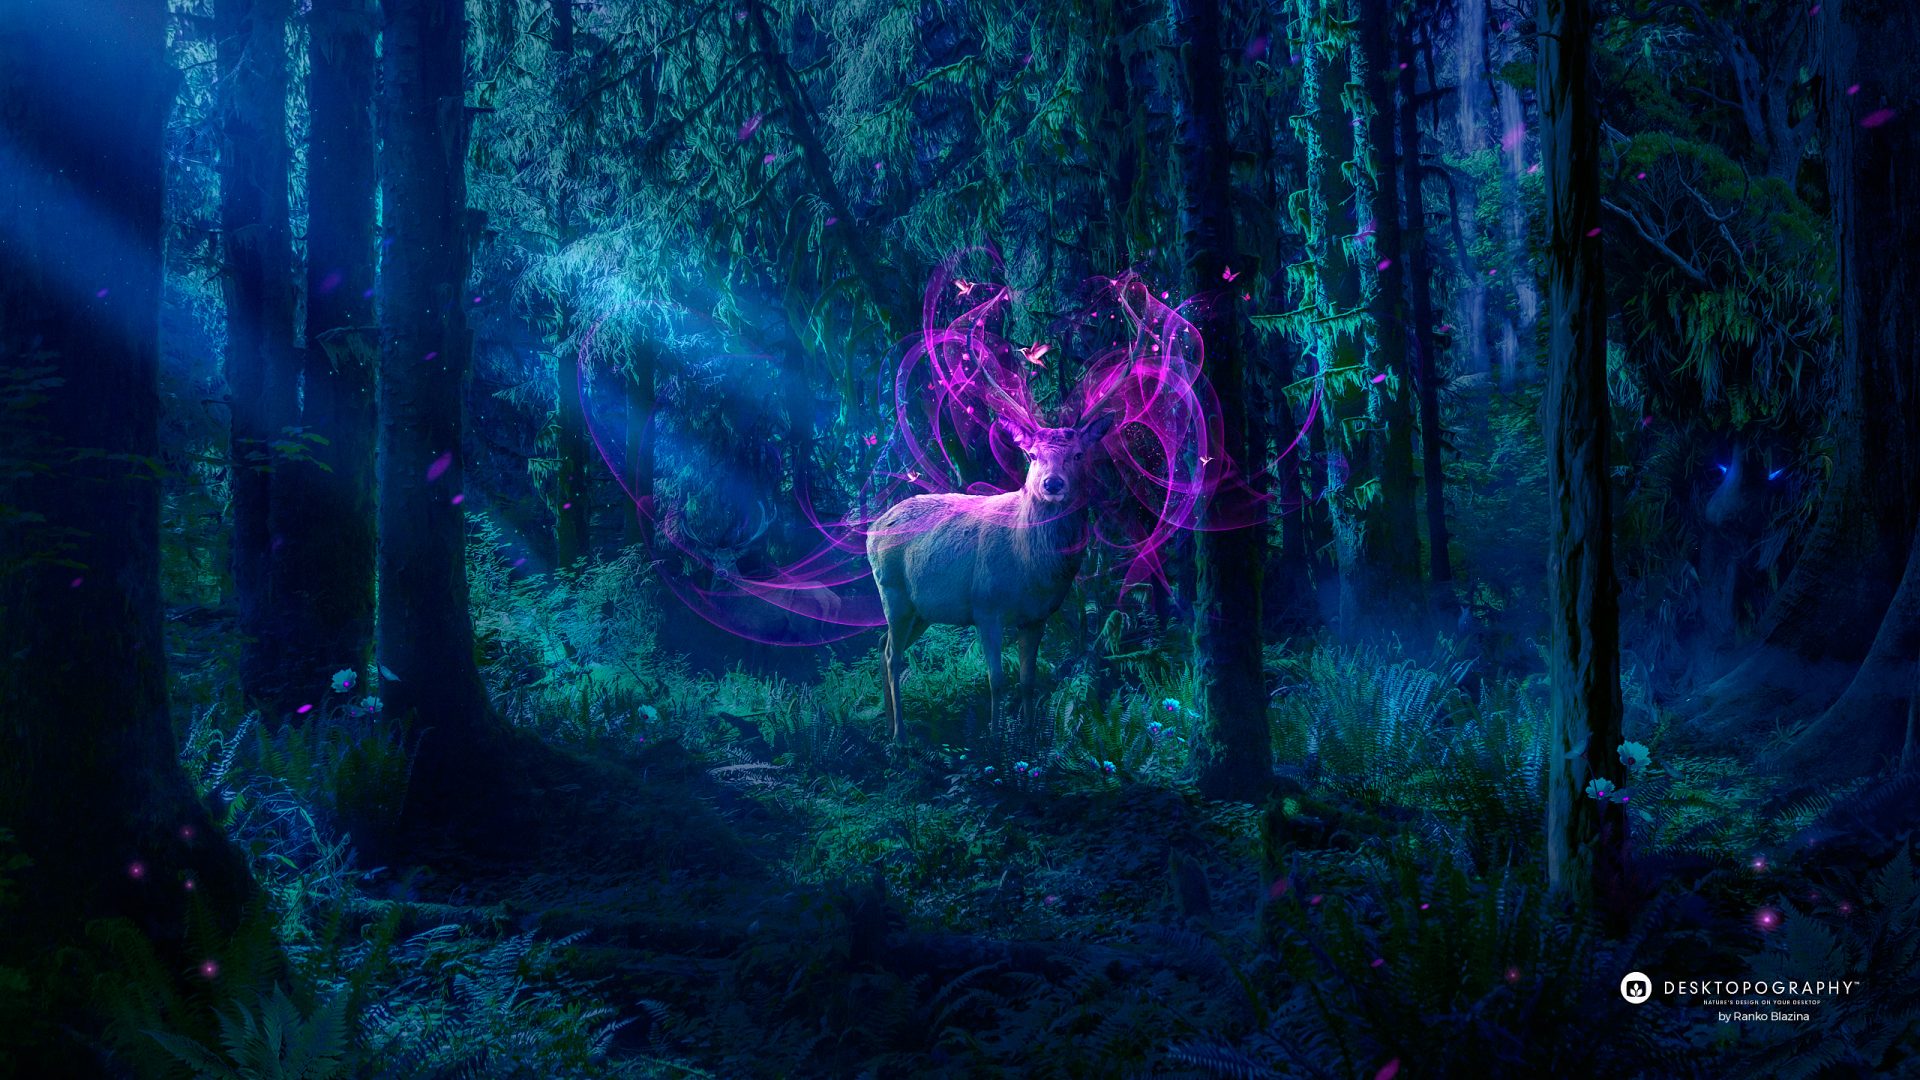 87100 Magical Forest Stock Photos Pictures  RoyaltyFree Images   iStock  Enchanted forest Magic forest Magical forest background